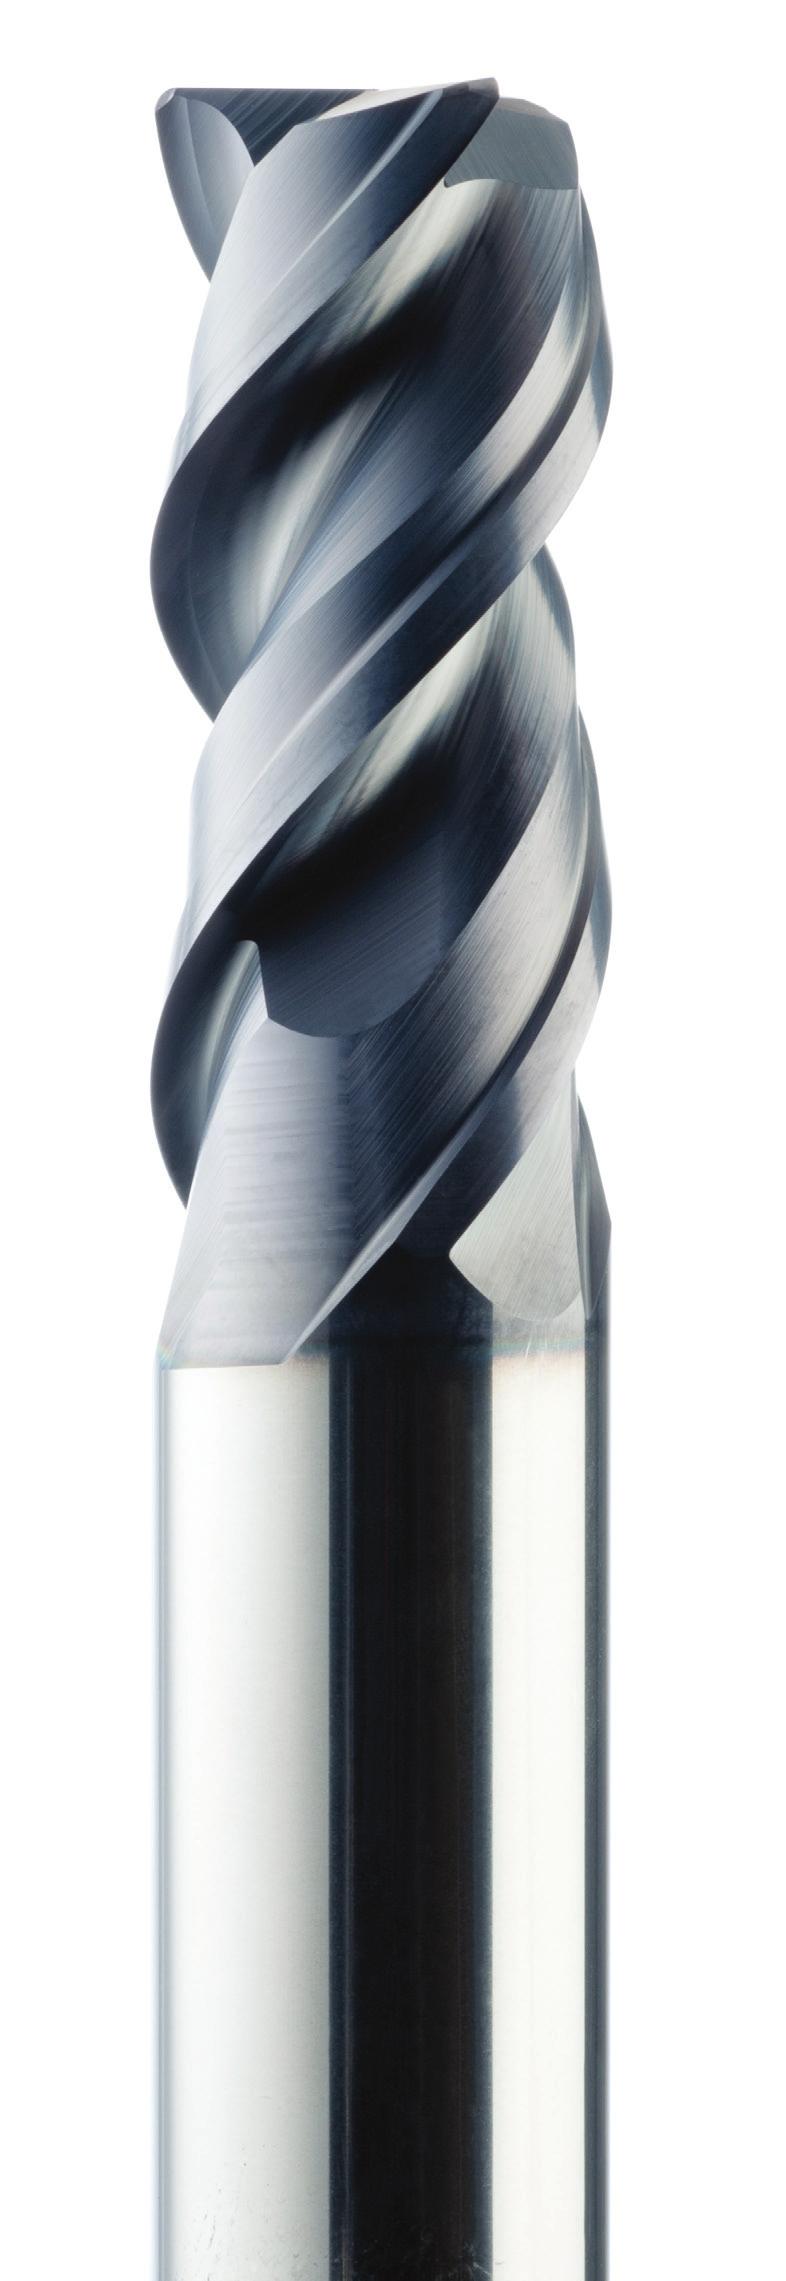 Using the latest in engineering design and grinding capabilities, Series 33 High Perfmance End Mills are ideal f aggressive ramping, pocketing, and slotting in difficult to machine materials such as